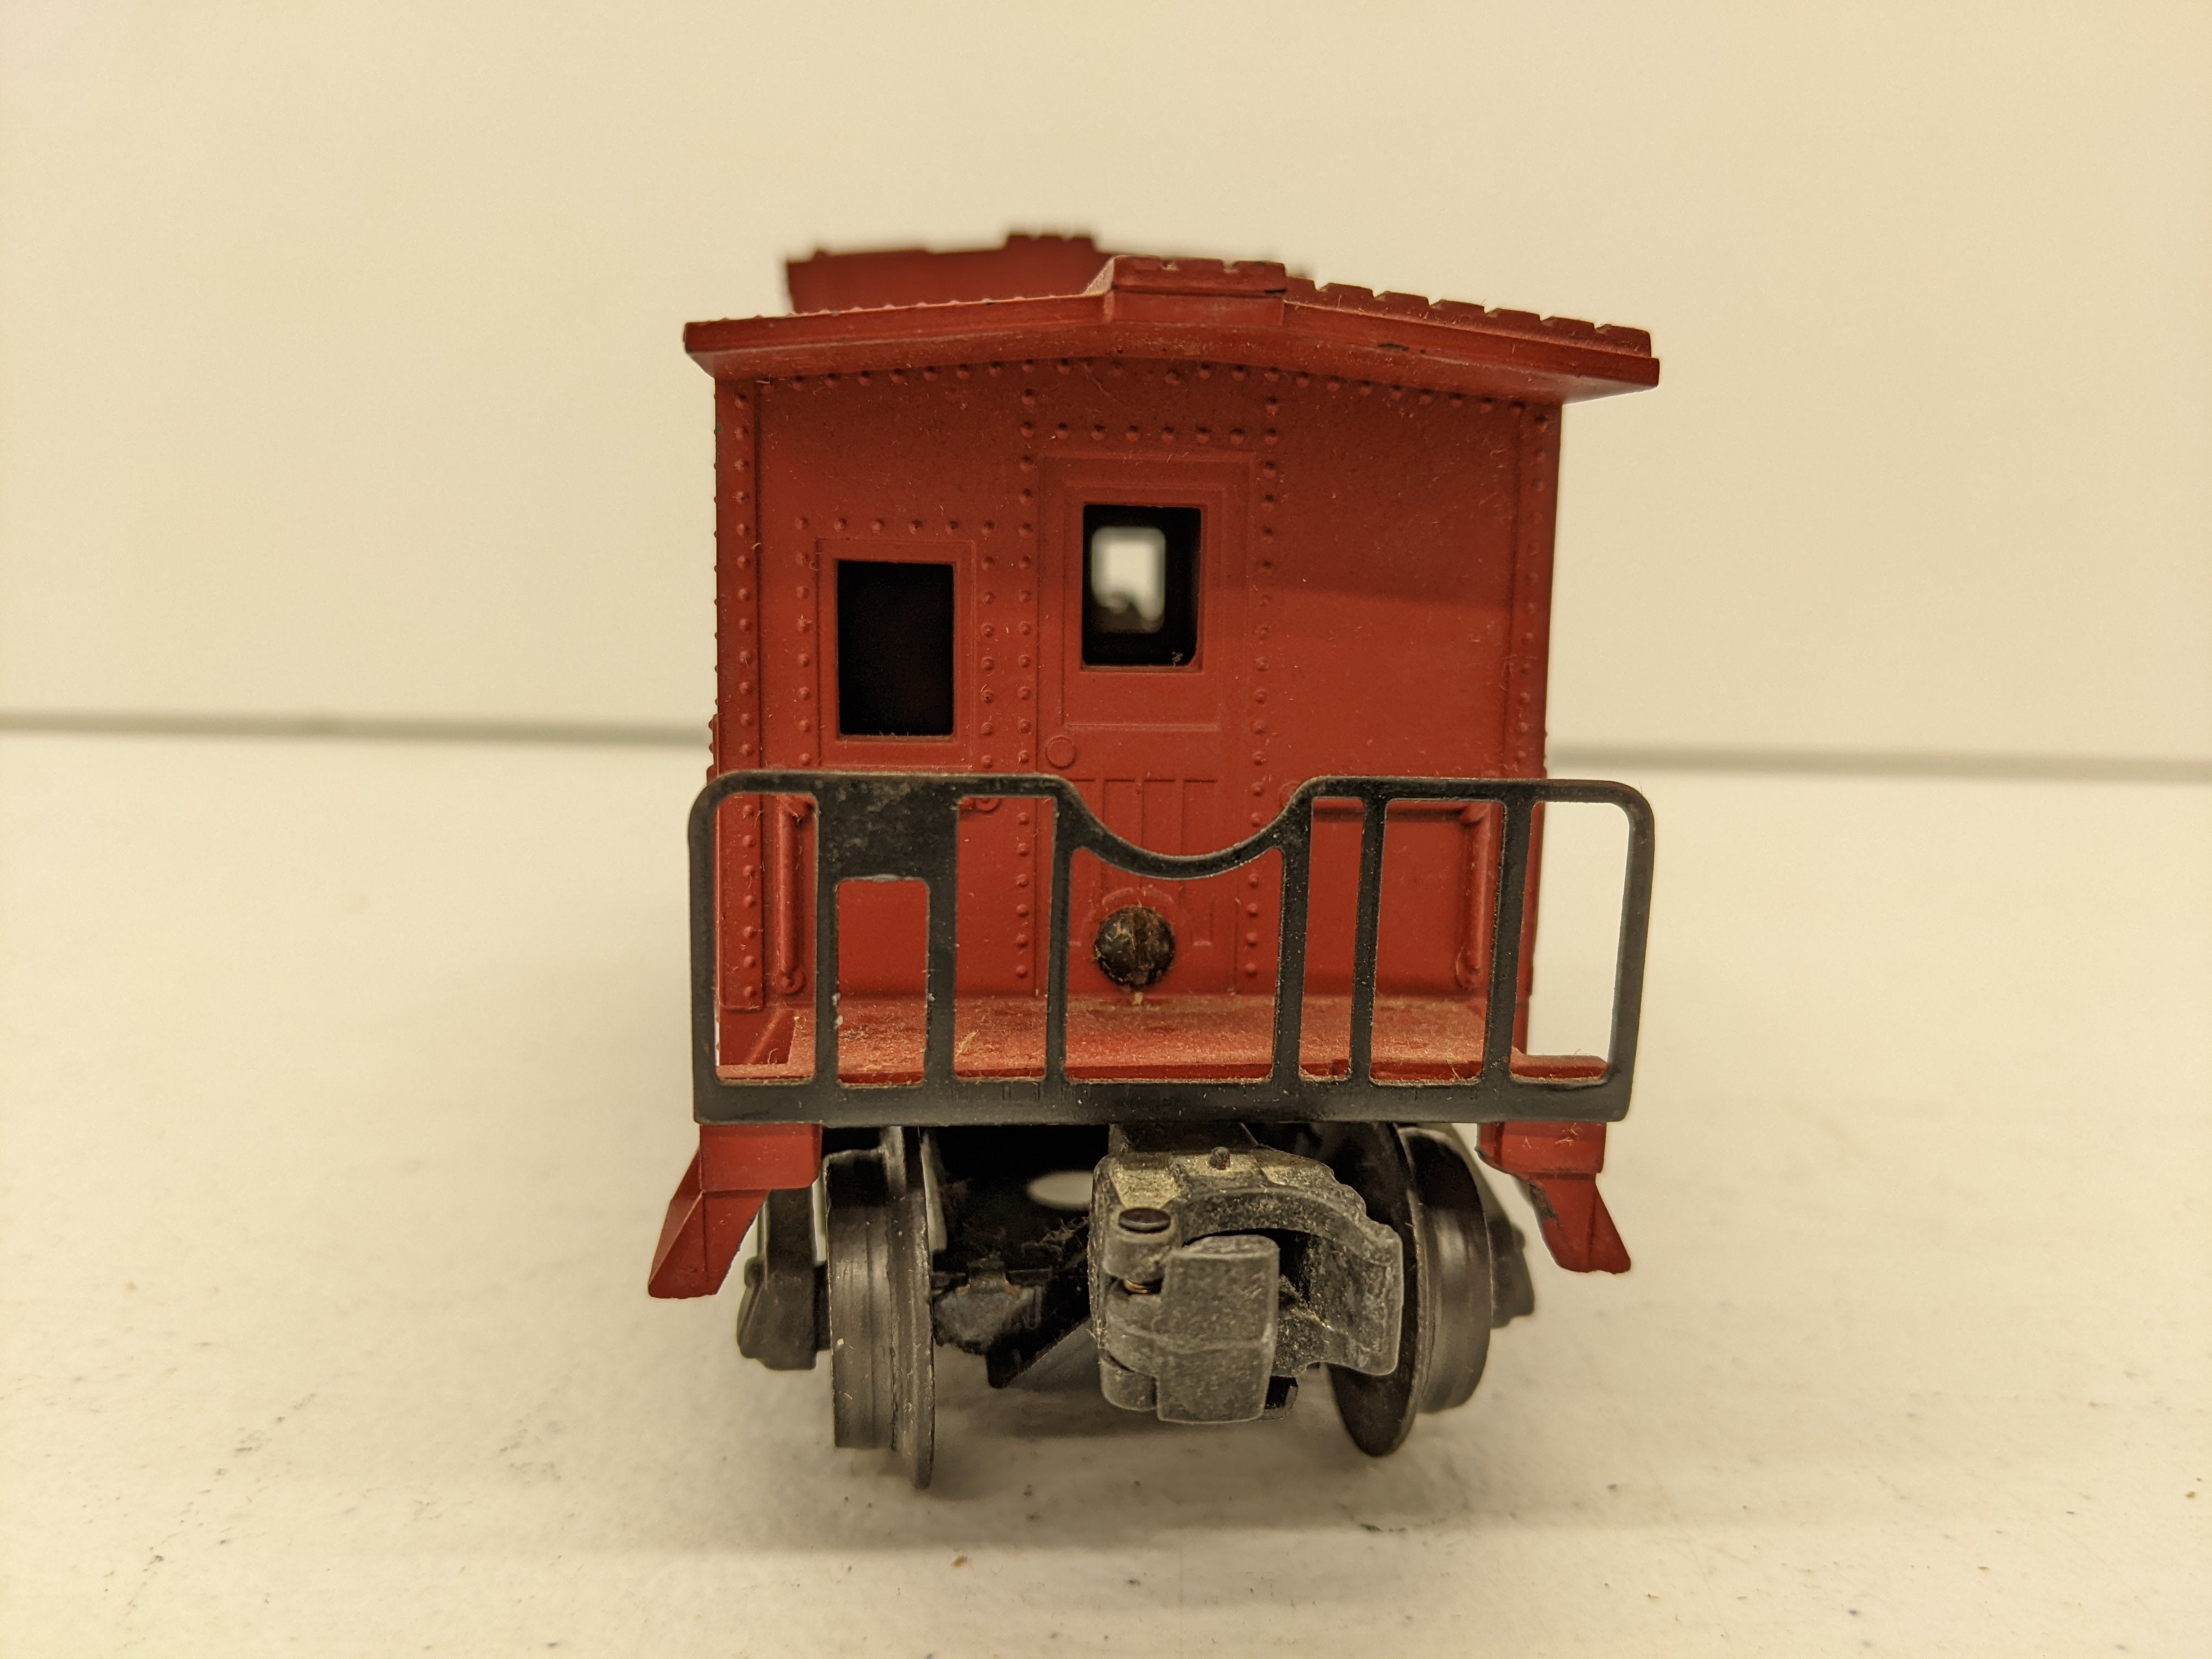 USED Lionel 6257 O Scale, Caboose, Southern Pacific SP #6257